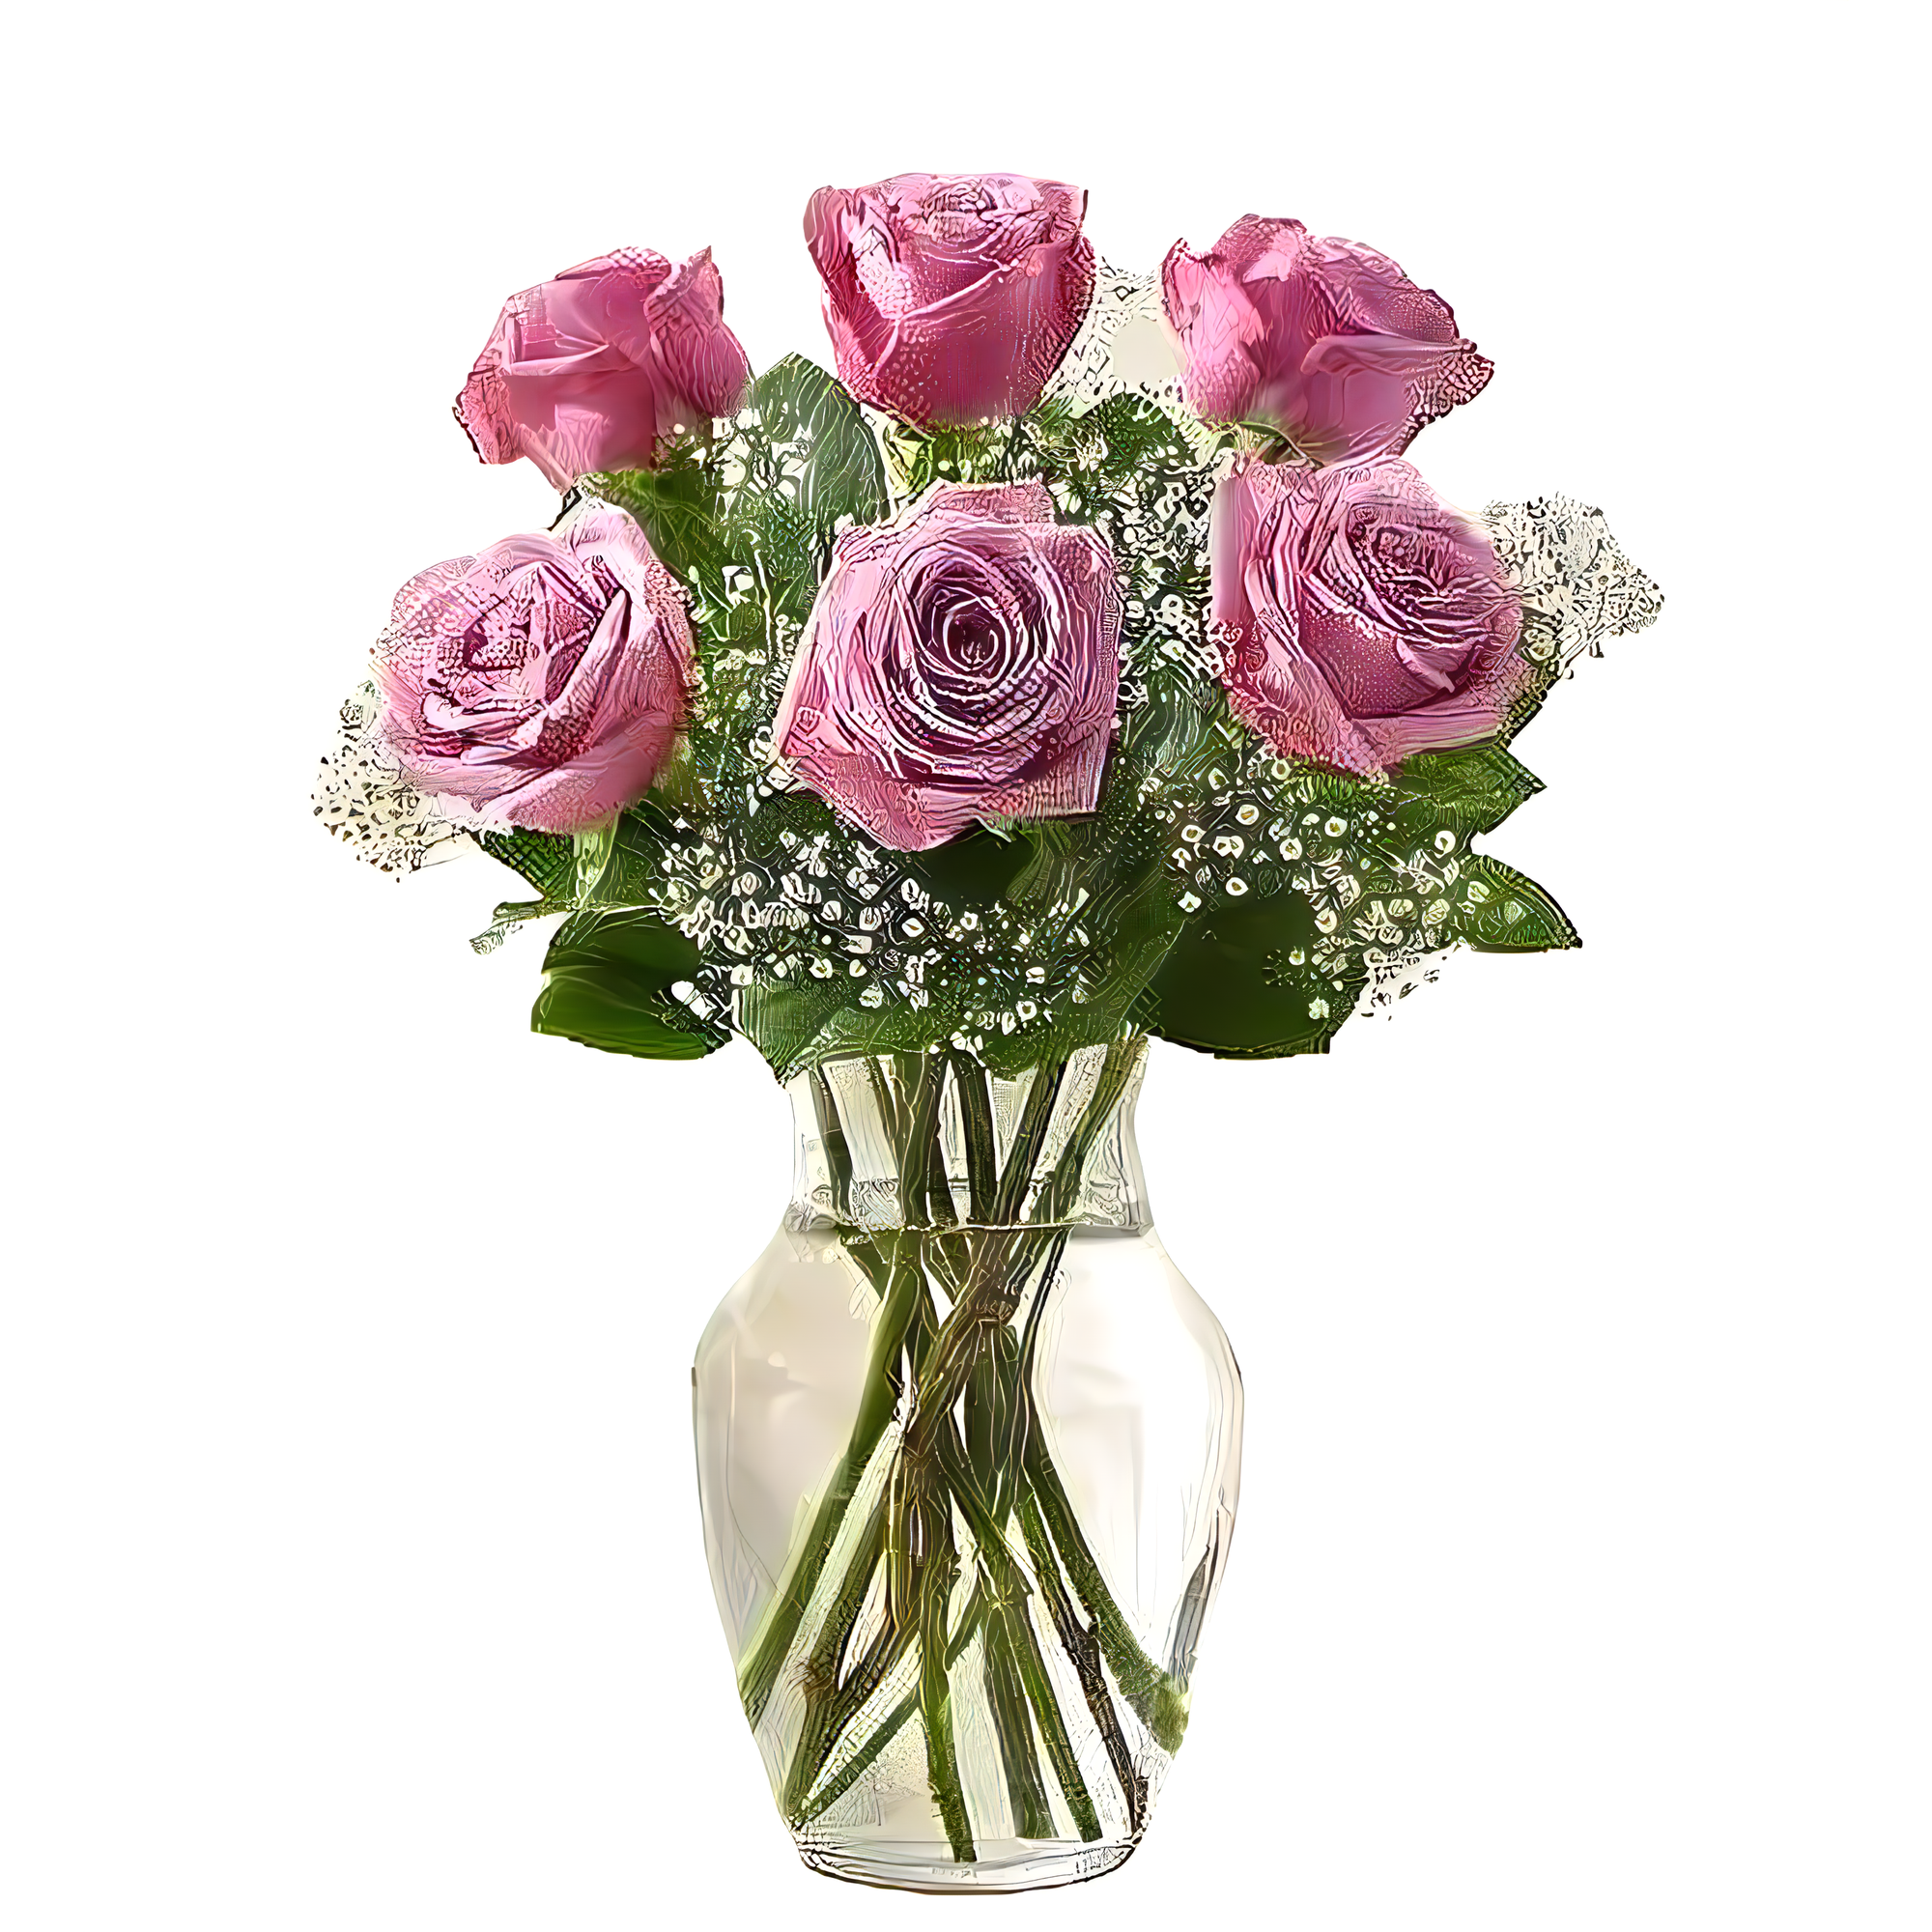 Manhattan Flower Delivery - Love's Embrace Roses Purple - Roses